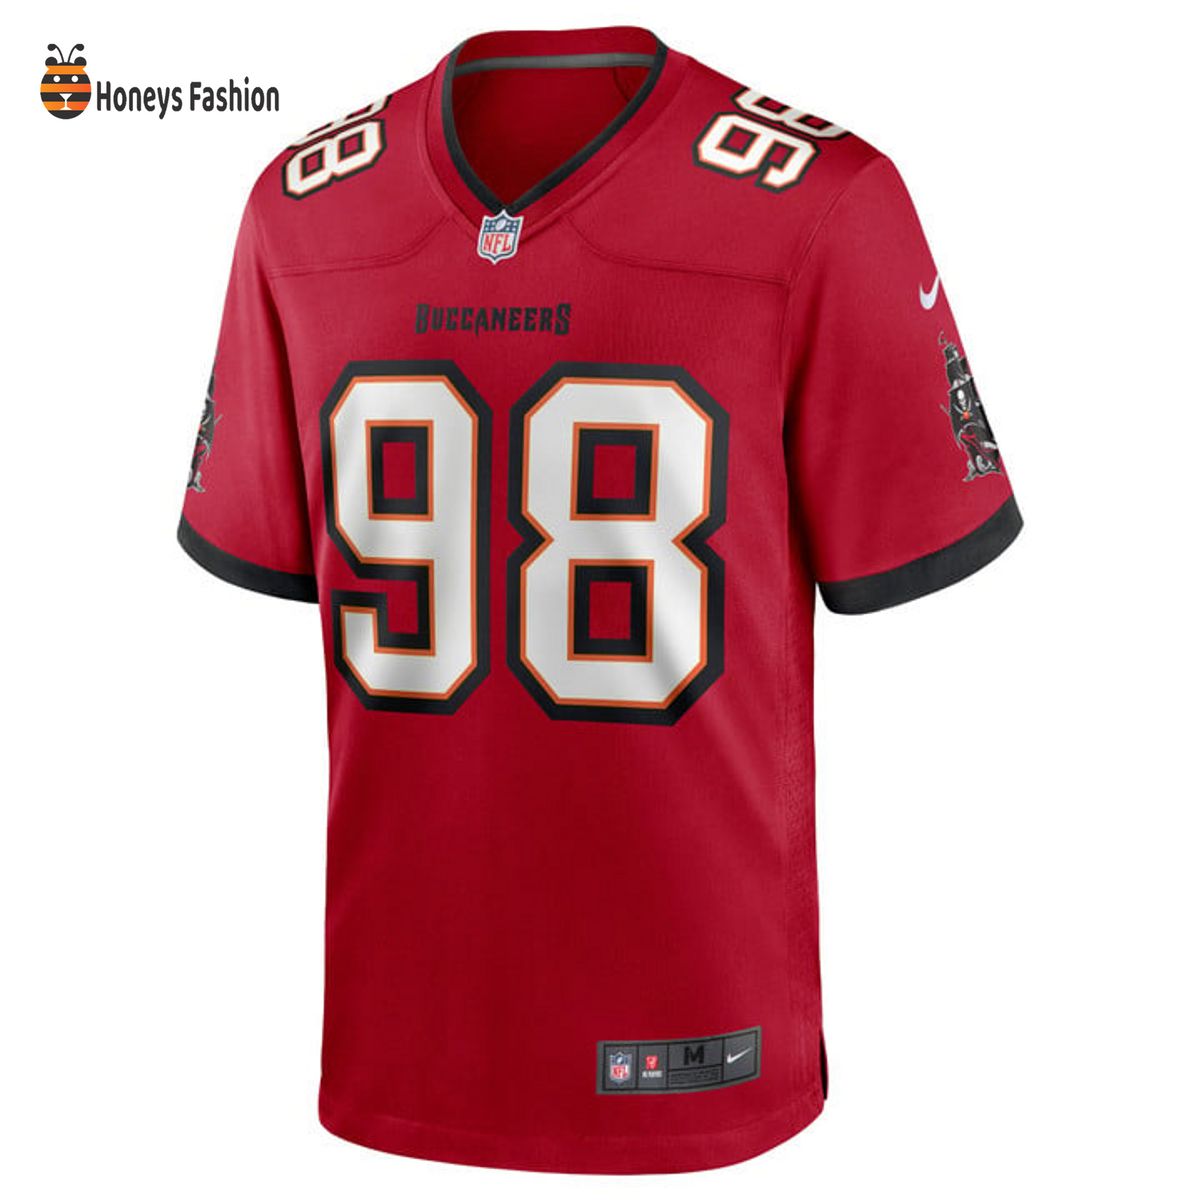 Anthony Nelson Tampa Bay Buccaneers Nike Red Game Jersey